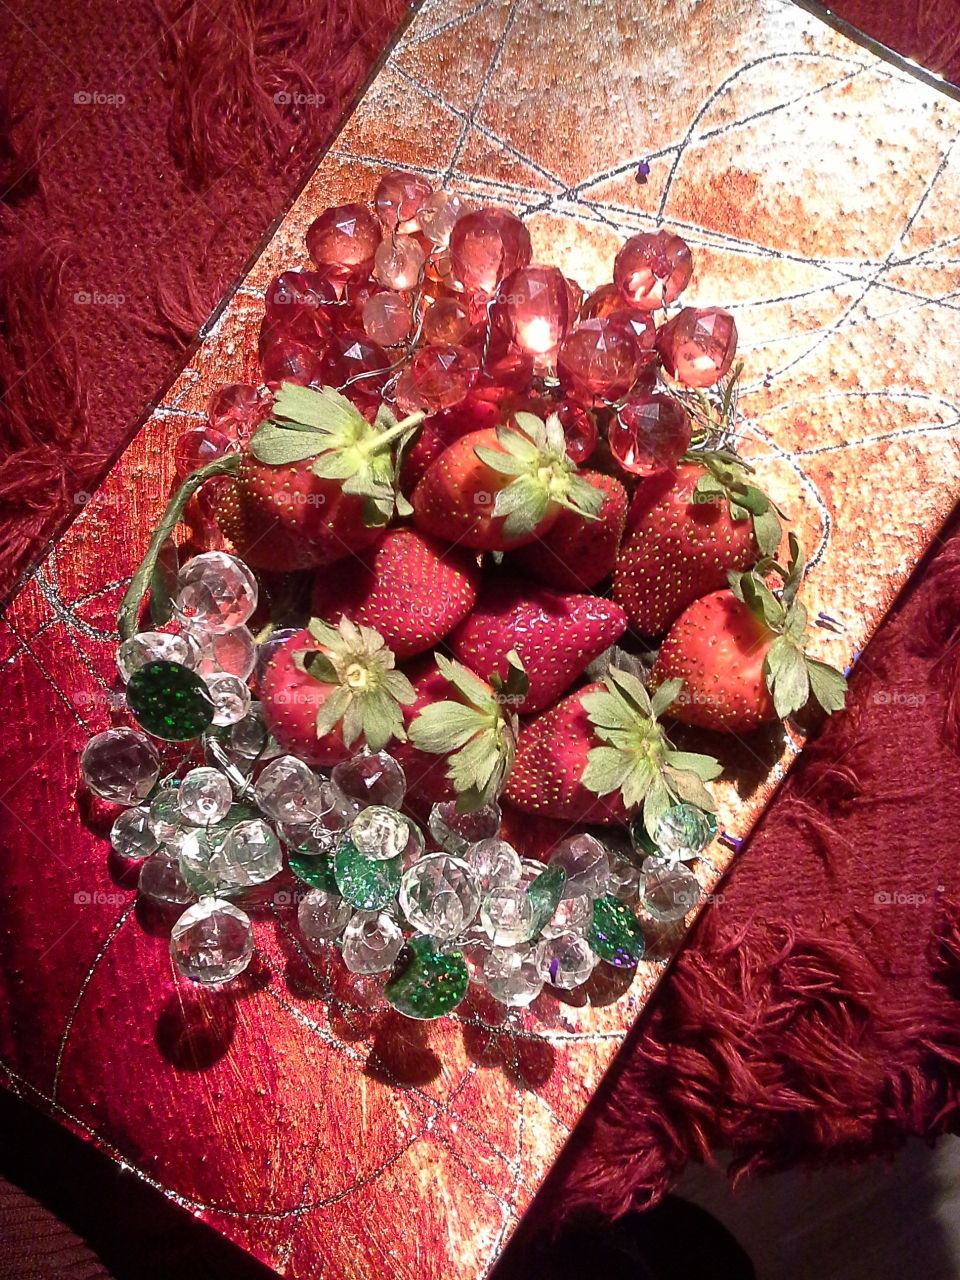 Strawberry Kiss!. Was for a competition